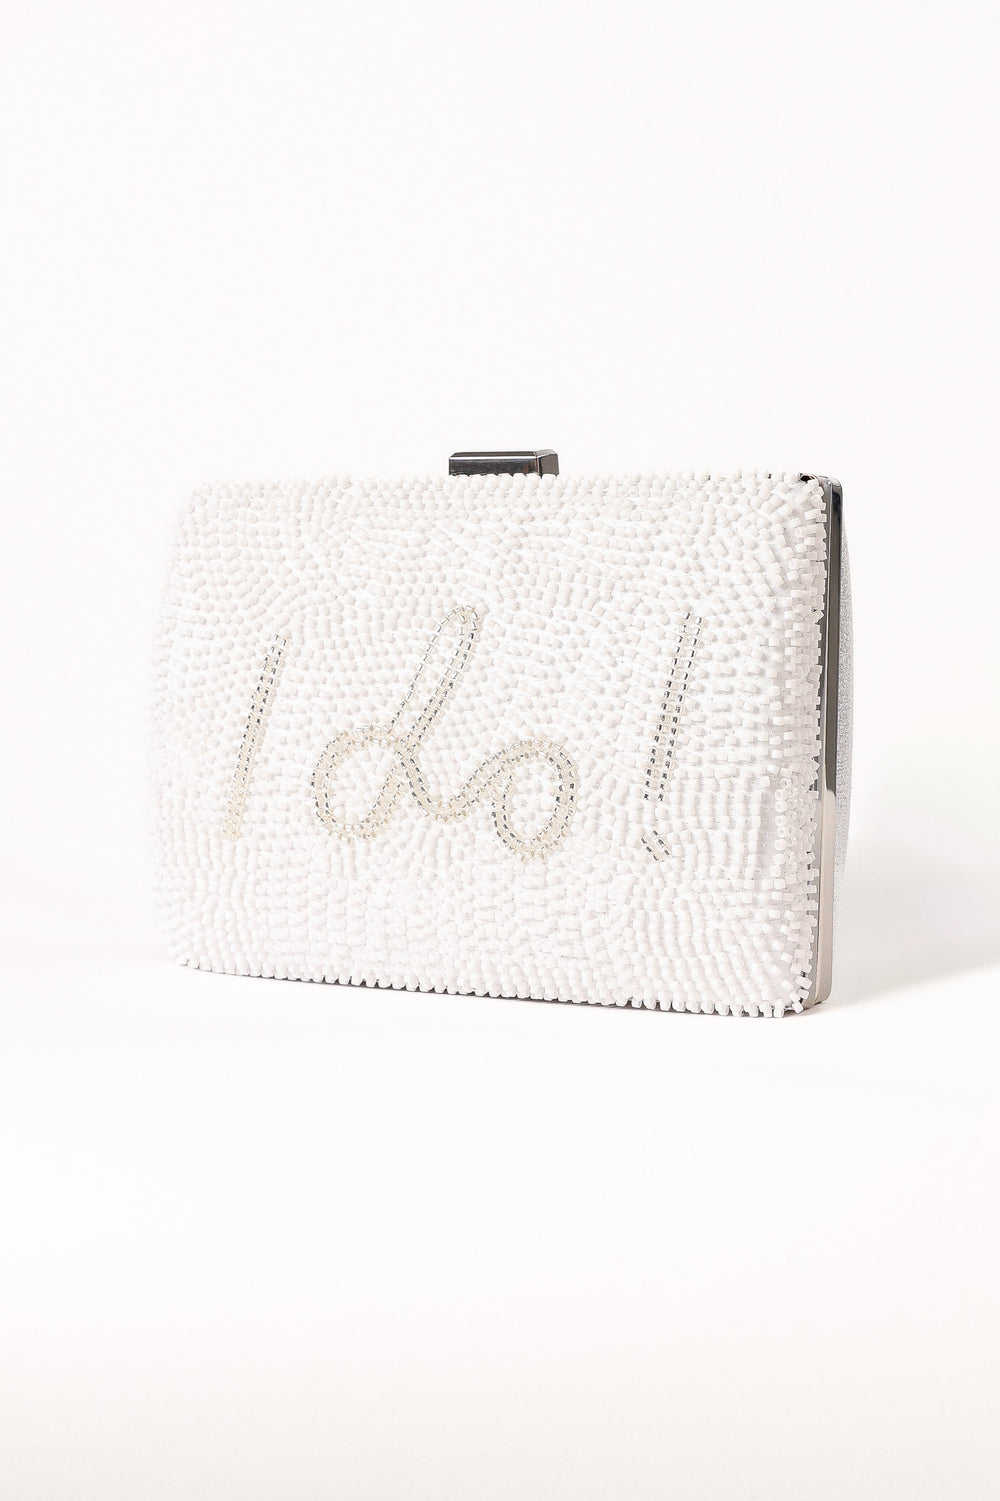 Petal and Pup USA ACCESSORIES Halle Clutch - White One Size